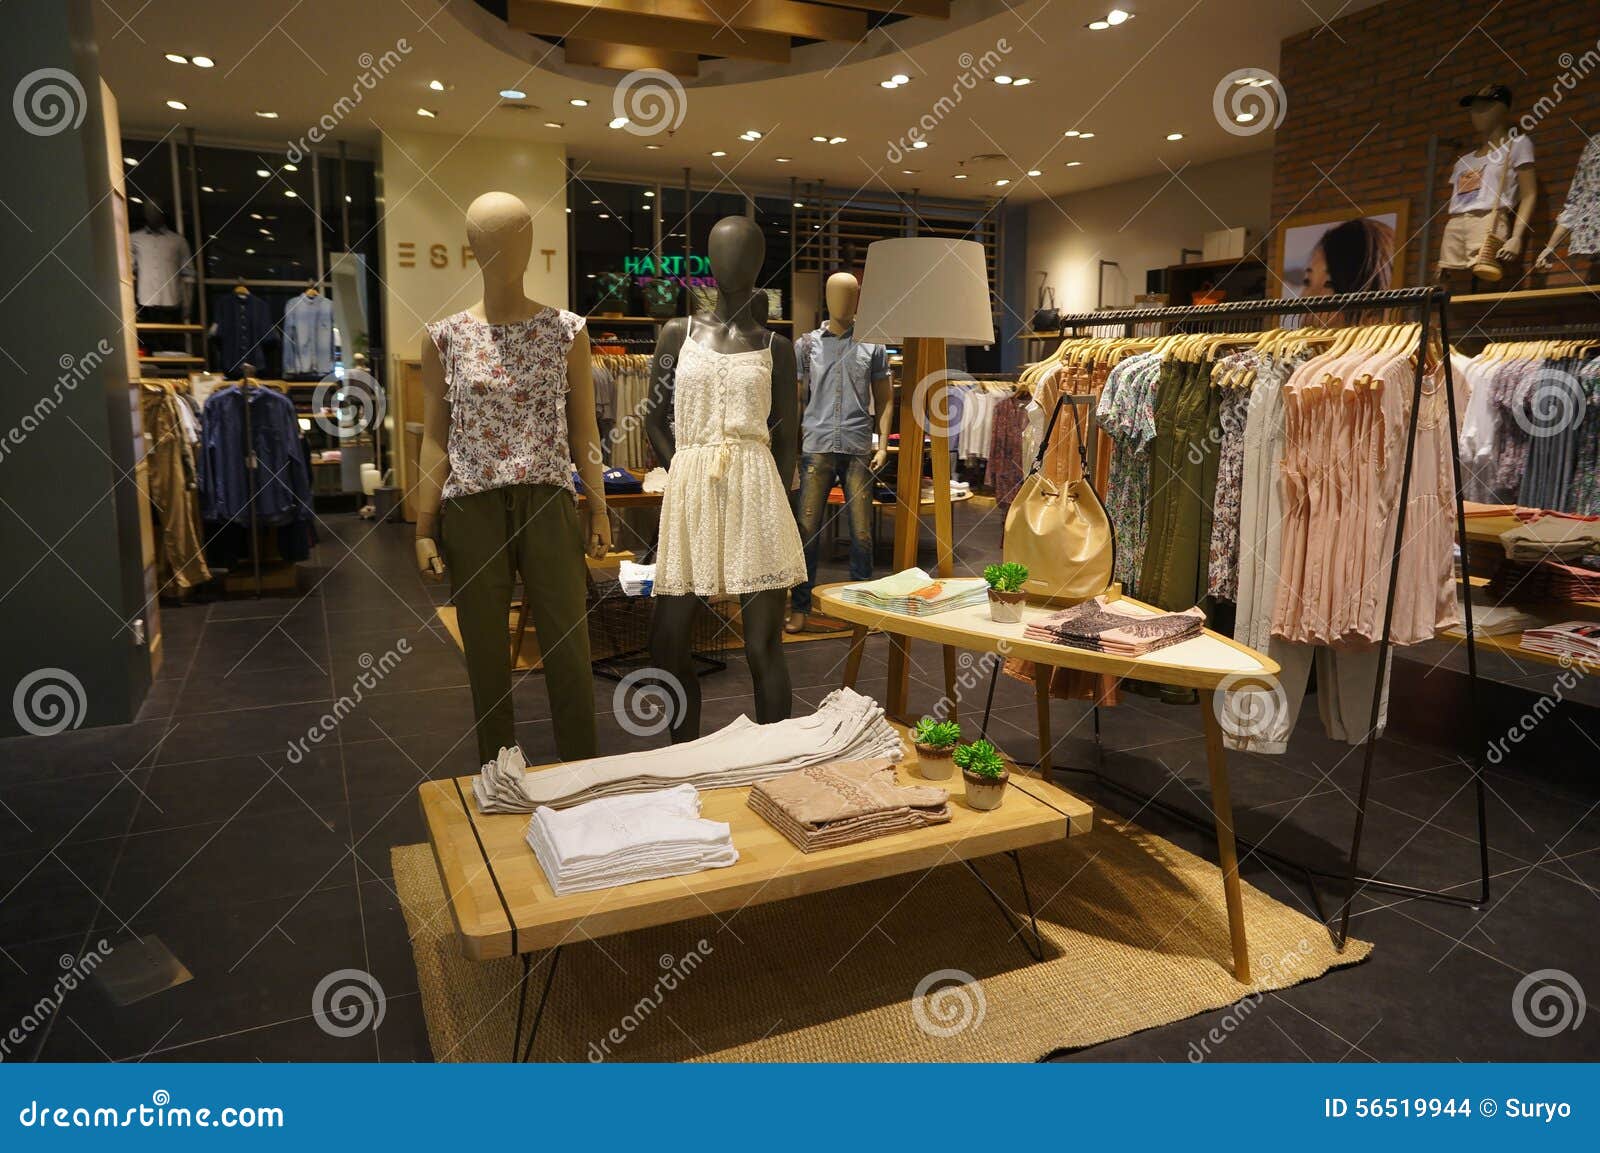 Fashion store editorial stock image. Image of display - 56519944